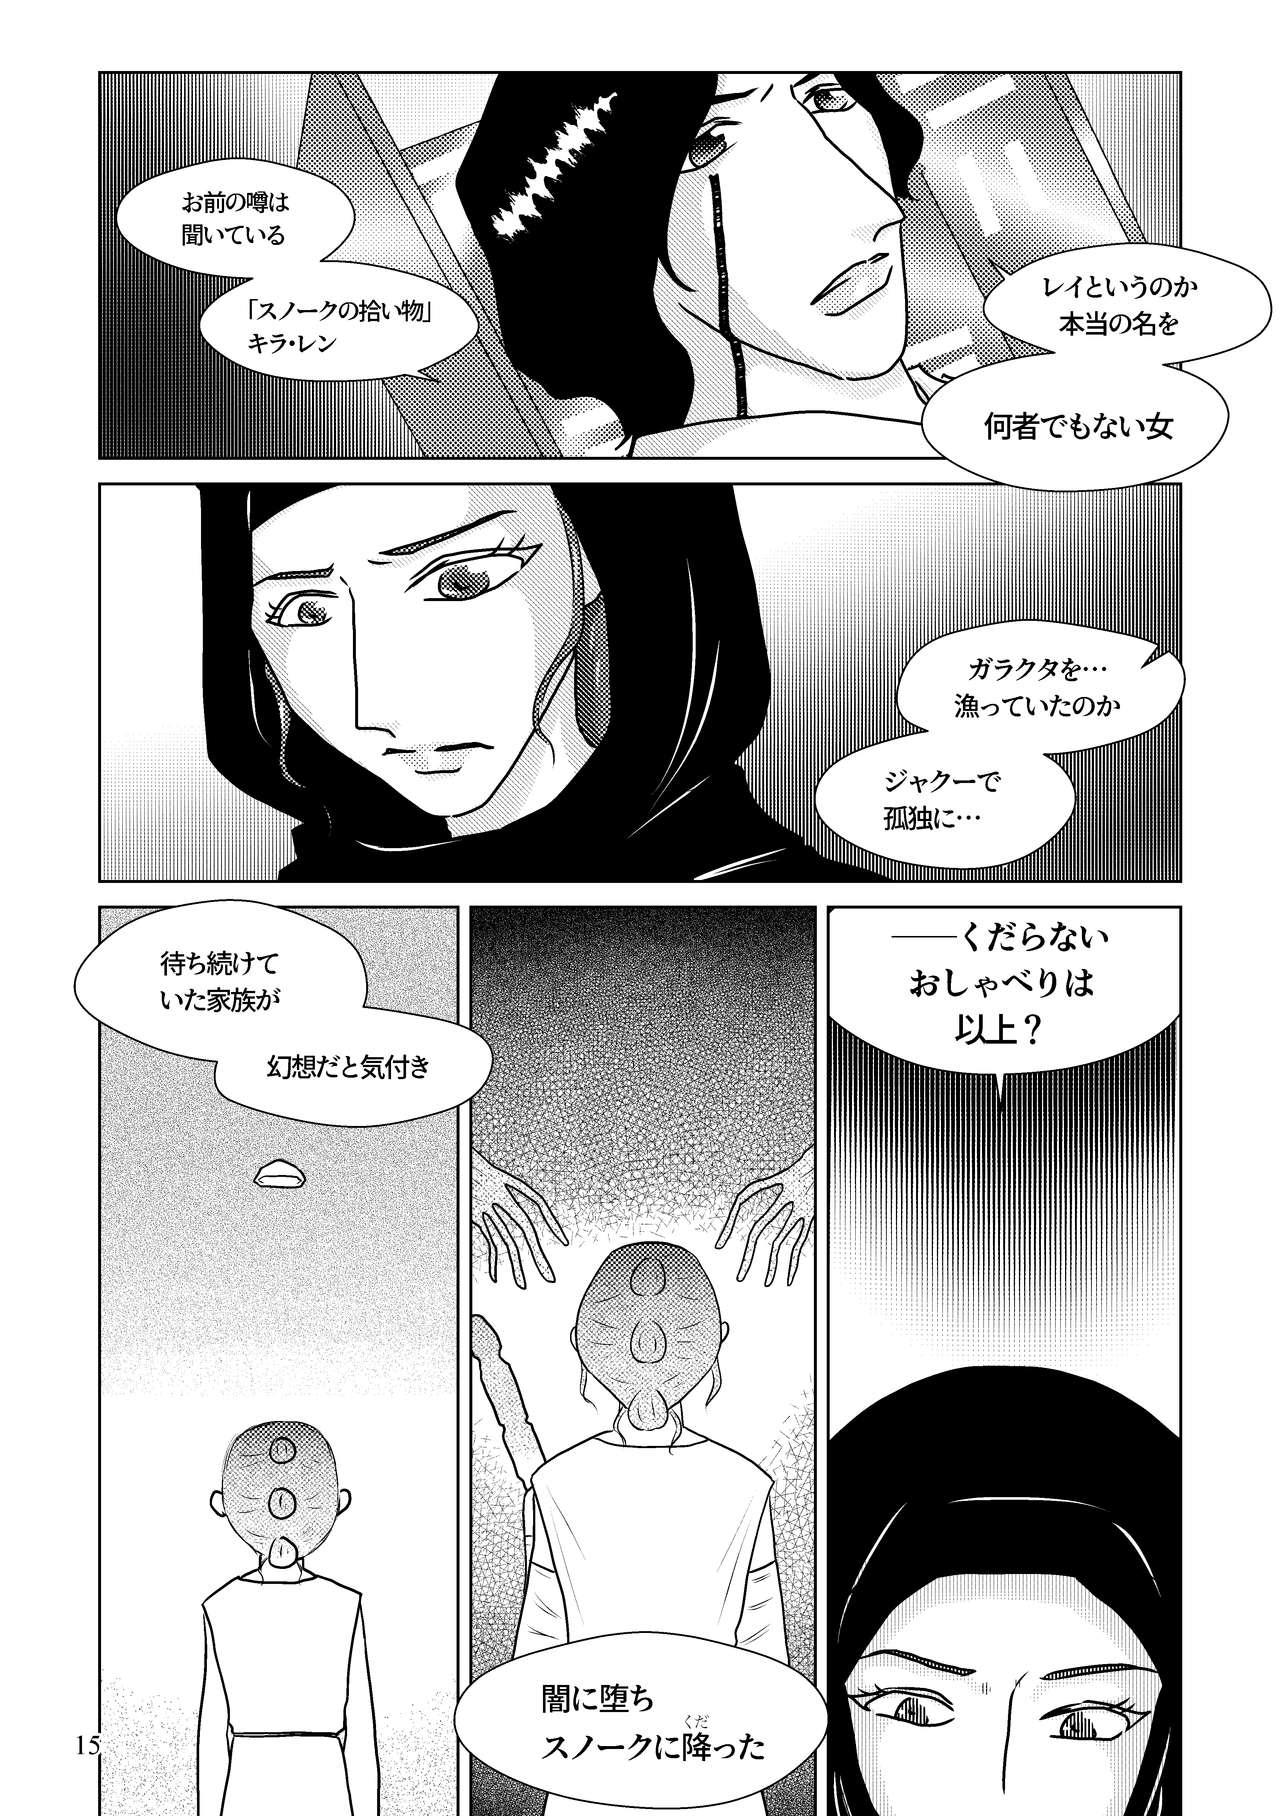 Shot Nothing But You Ch. 1-9 - Star wars Shot - Page 5